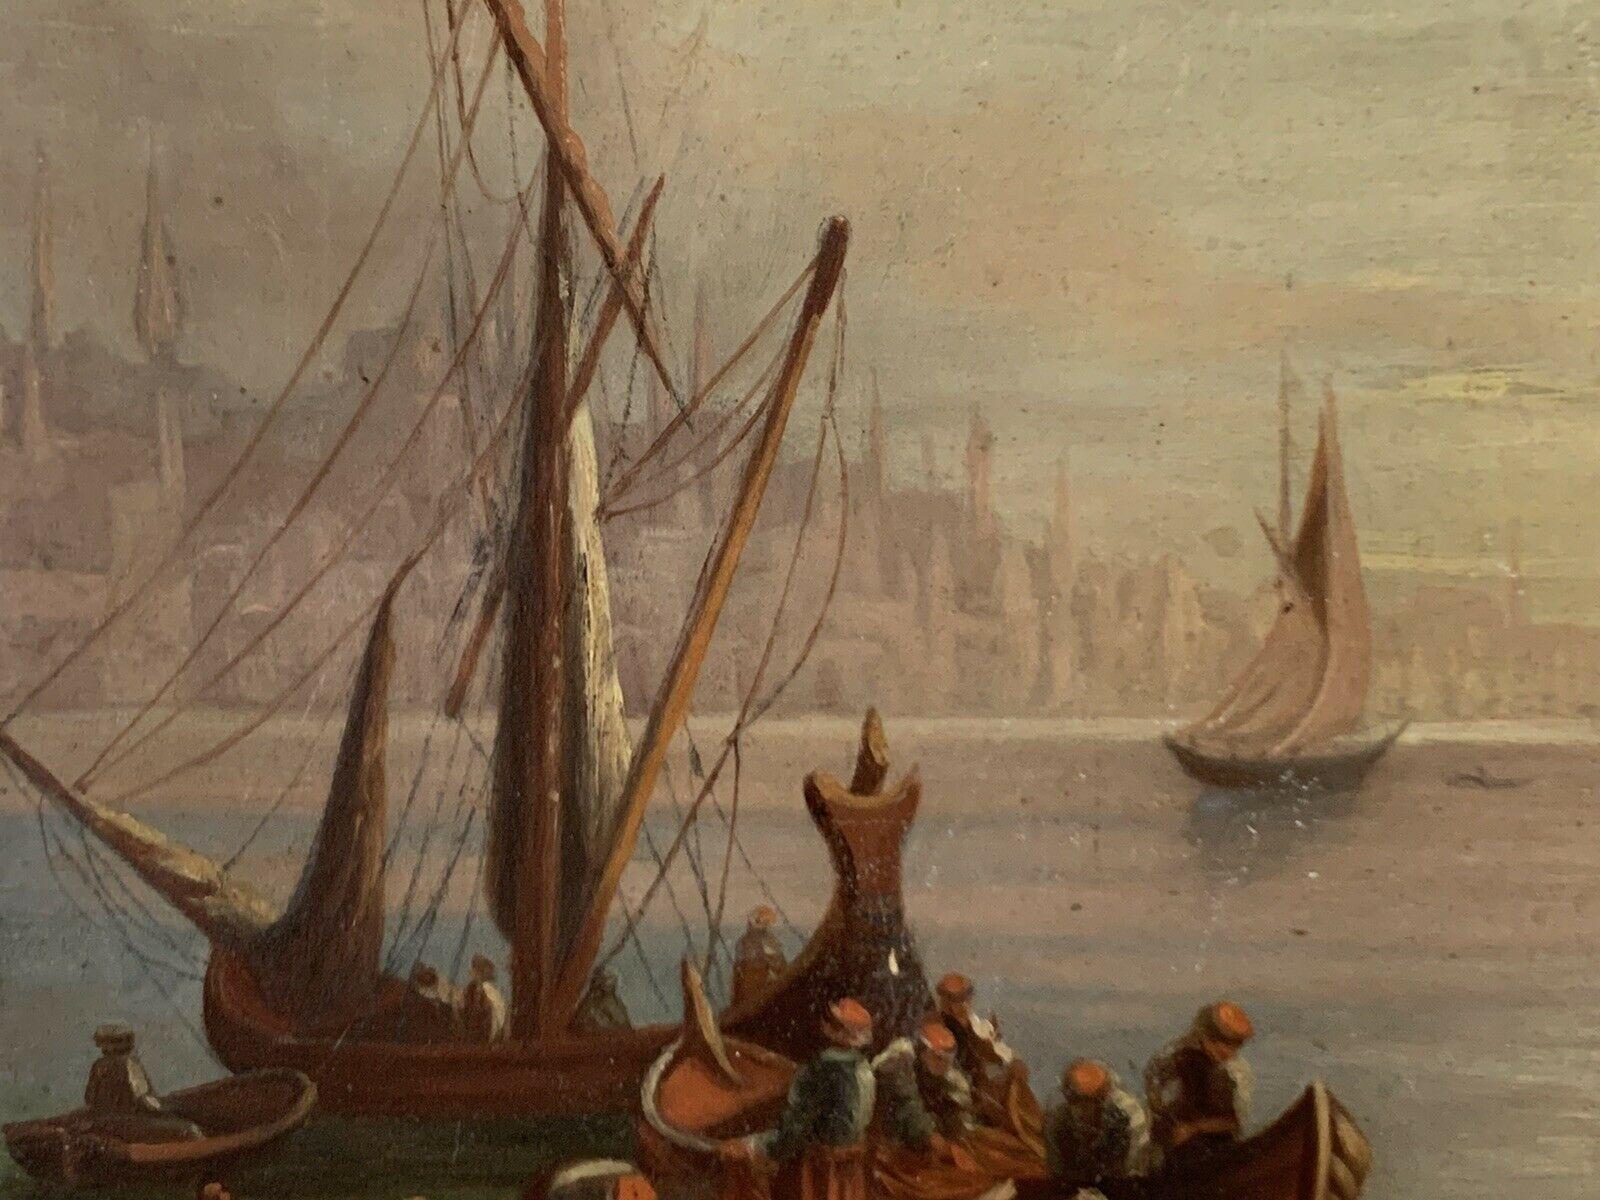 19th CENTURY EUROPEAN OIL ON WOOD PANEL - BUSY MERCHANT SHIPPING SUNSET SCENE - Victorian Painting by Unknown